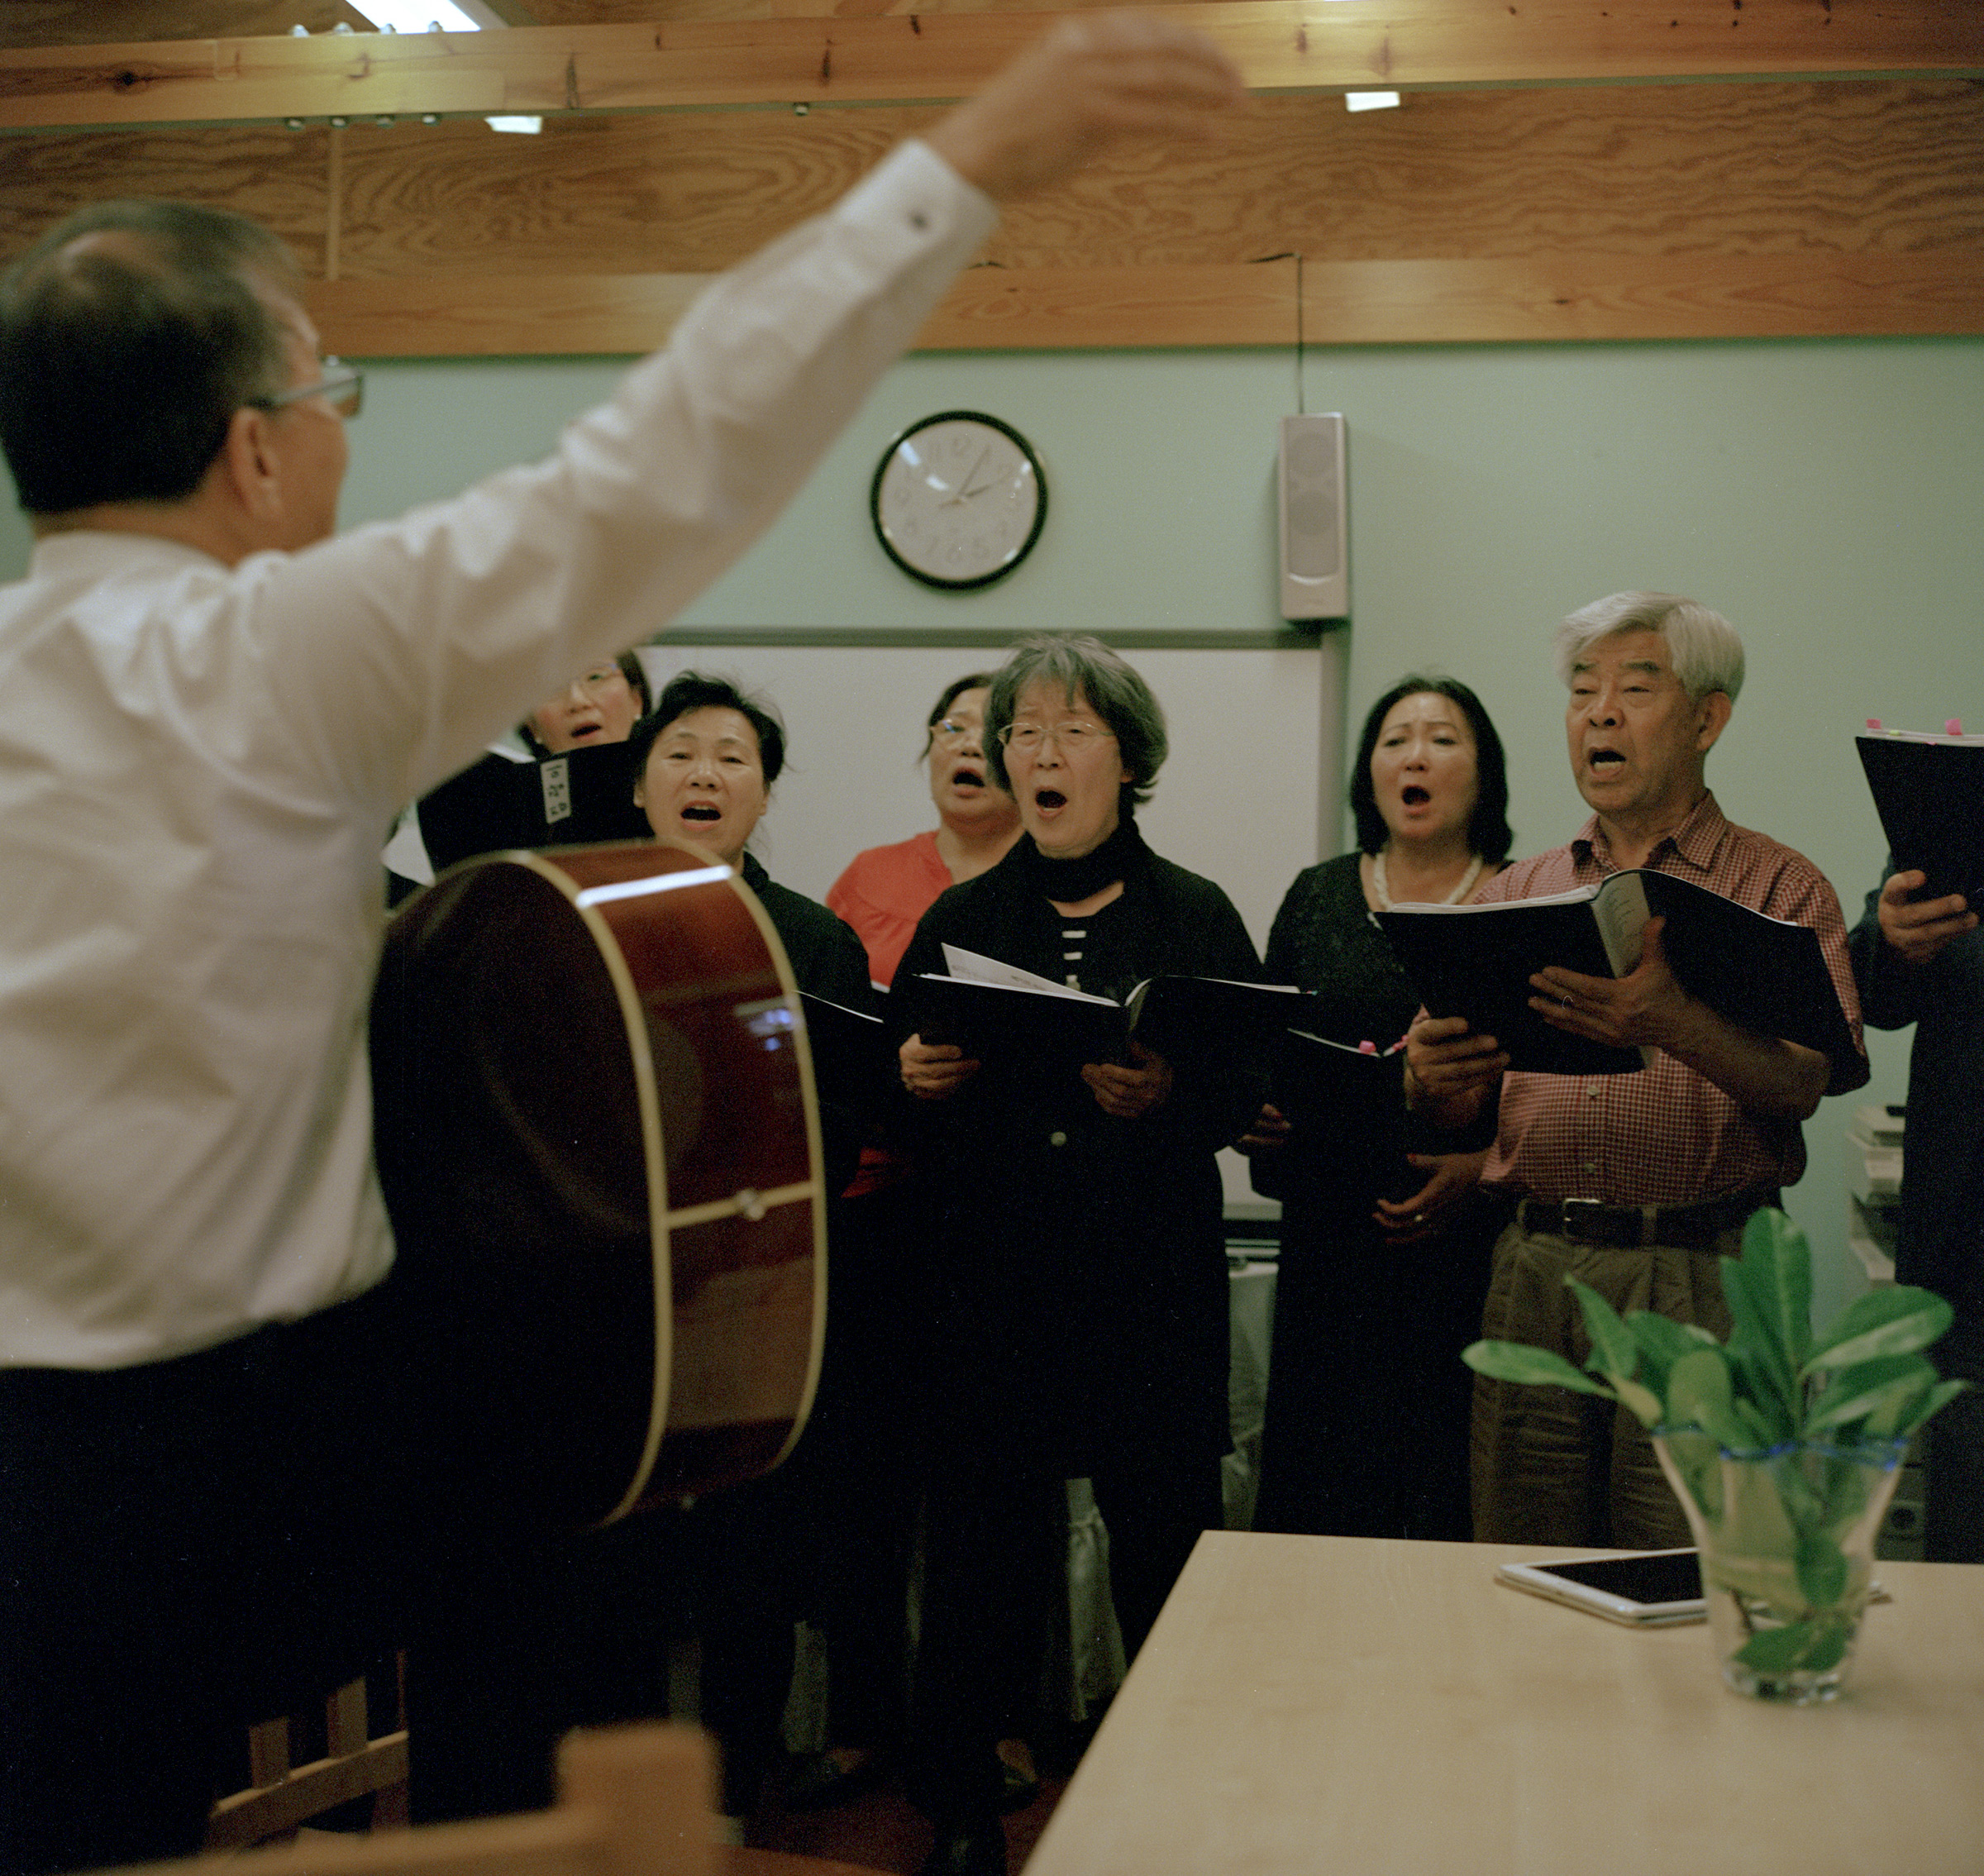 A group of South Koreans, North Koreans, and Korean Chinese sing together at the Korean Senior Citizens centre, New Malden, on Sept. 15. (Michael Vince Kim for TIME)